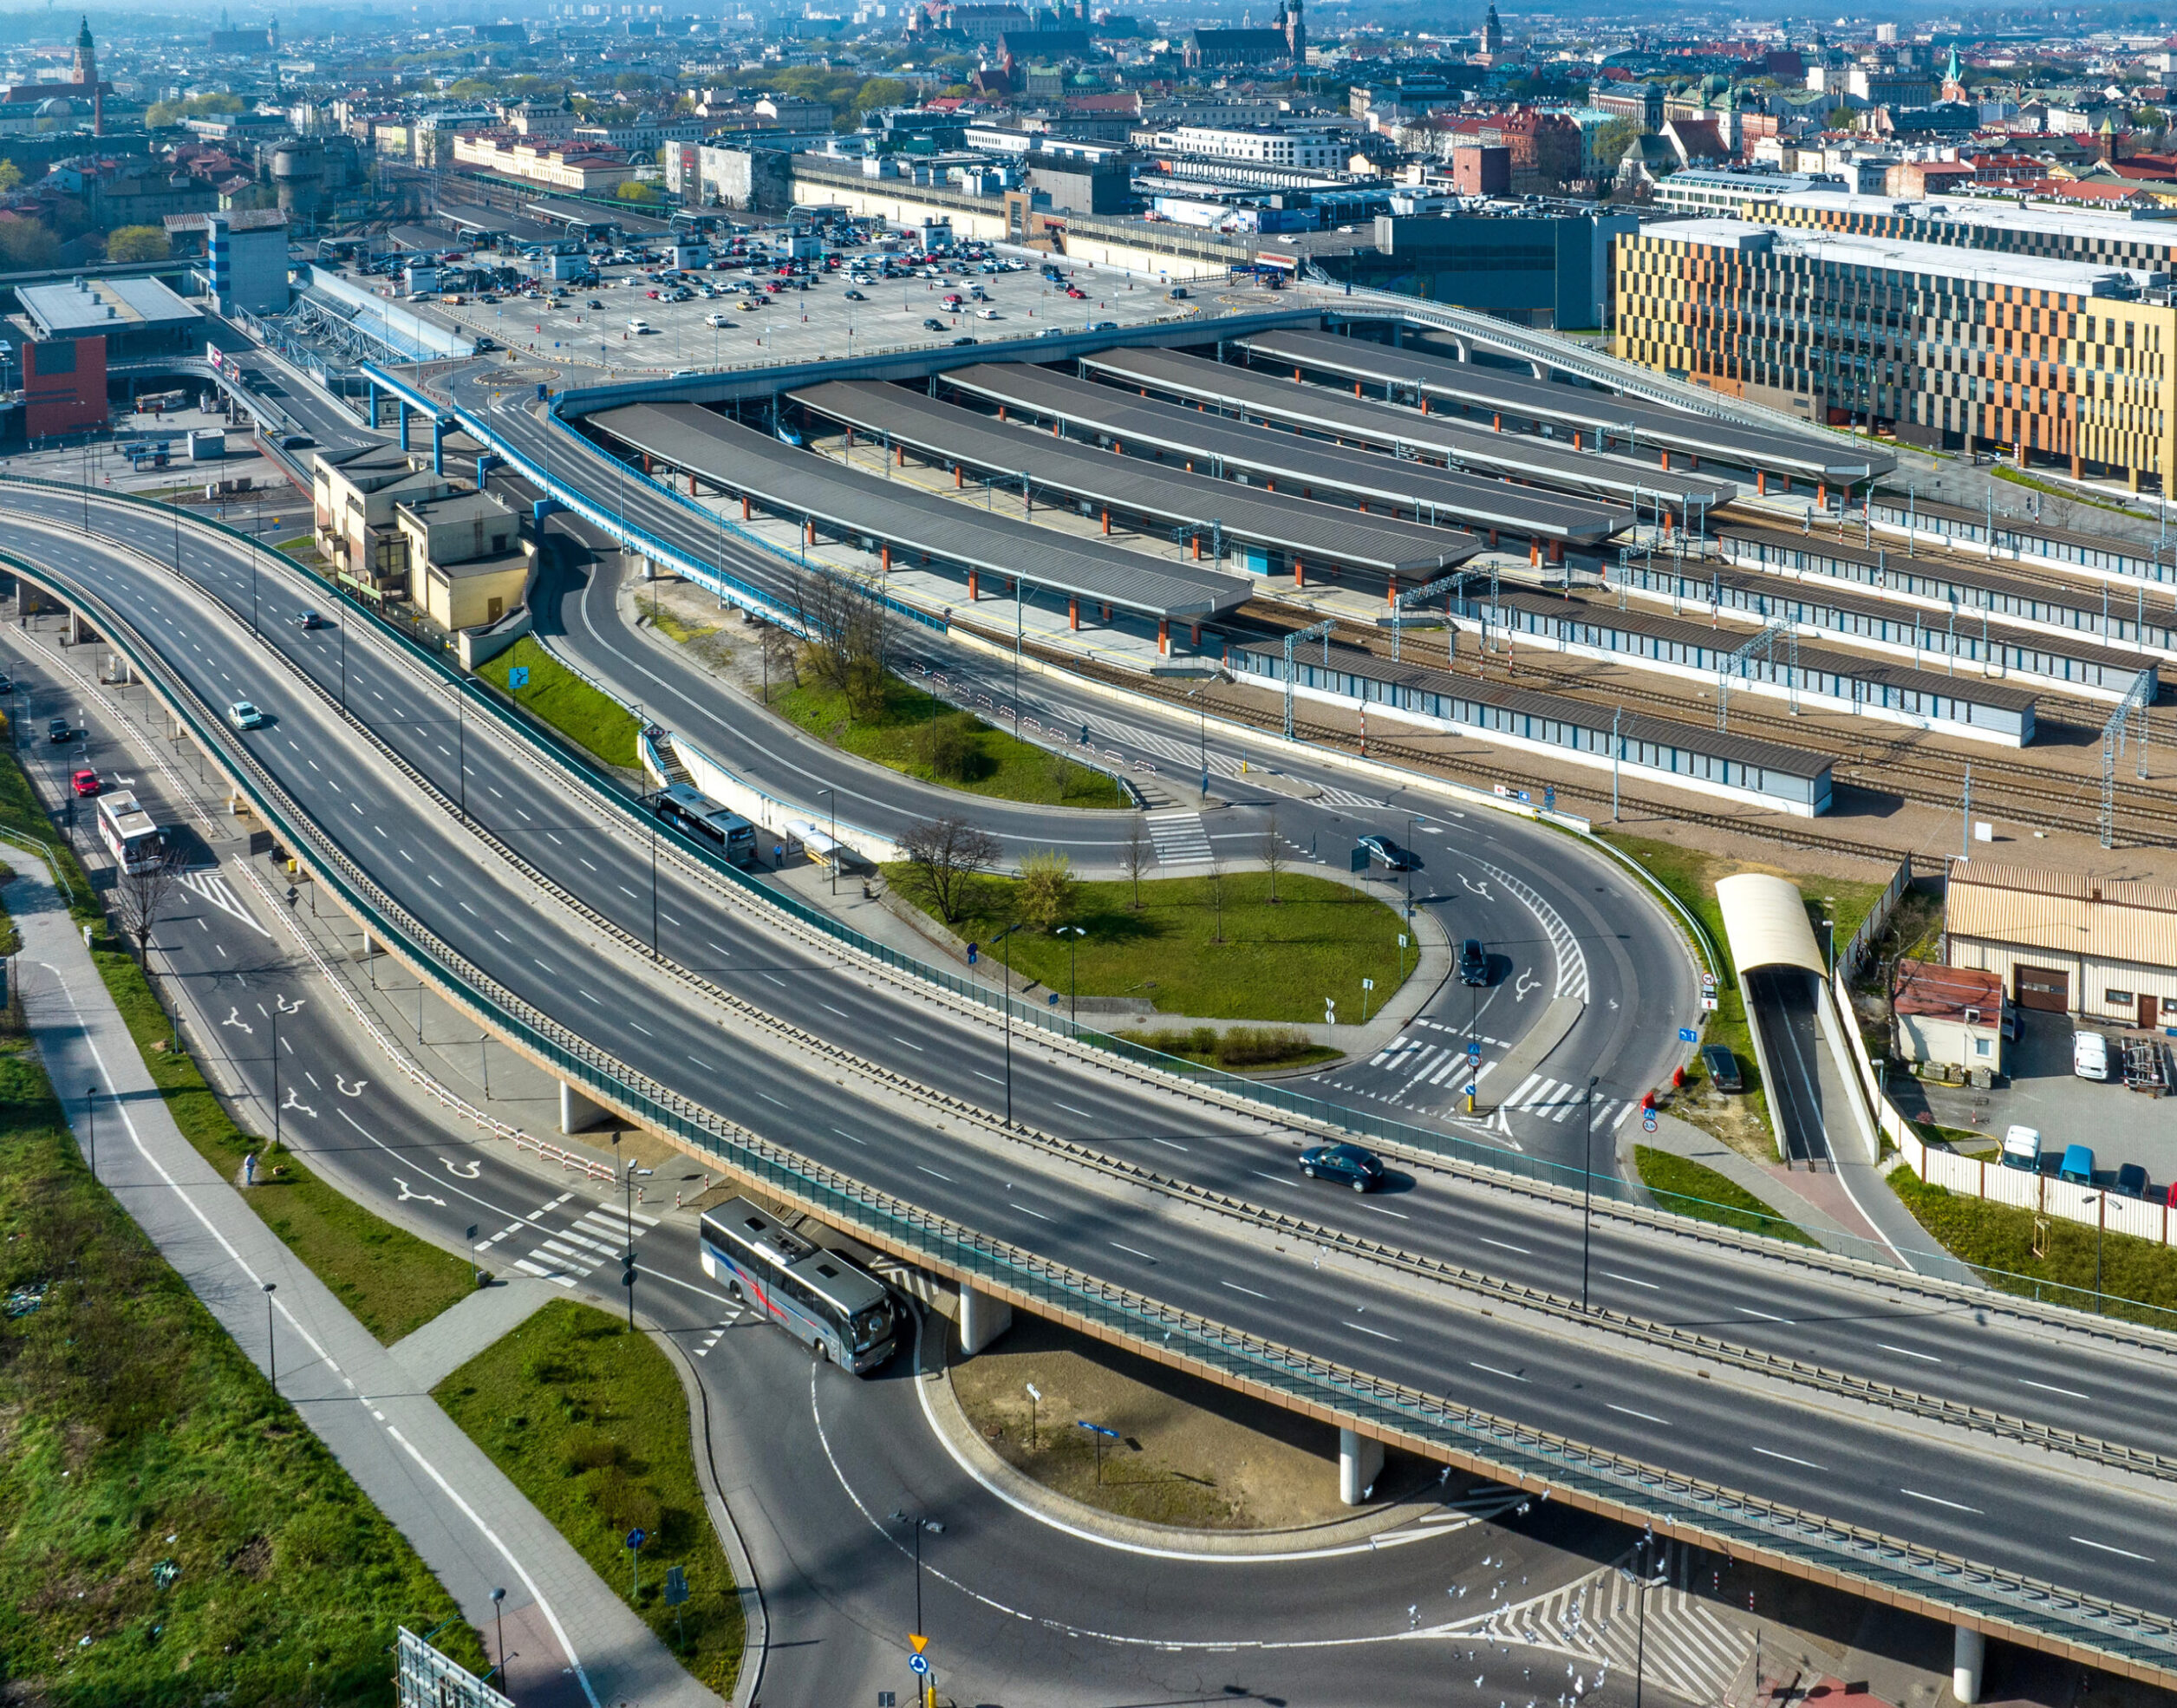 Manage Your Transportation Infrastructure with IBM Maximo and Cohesive